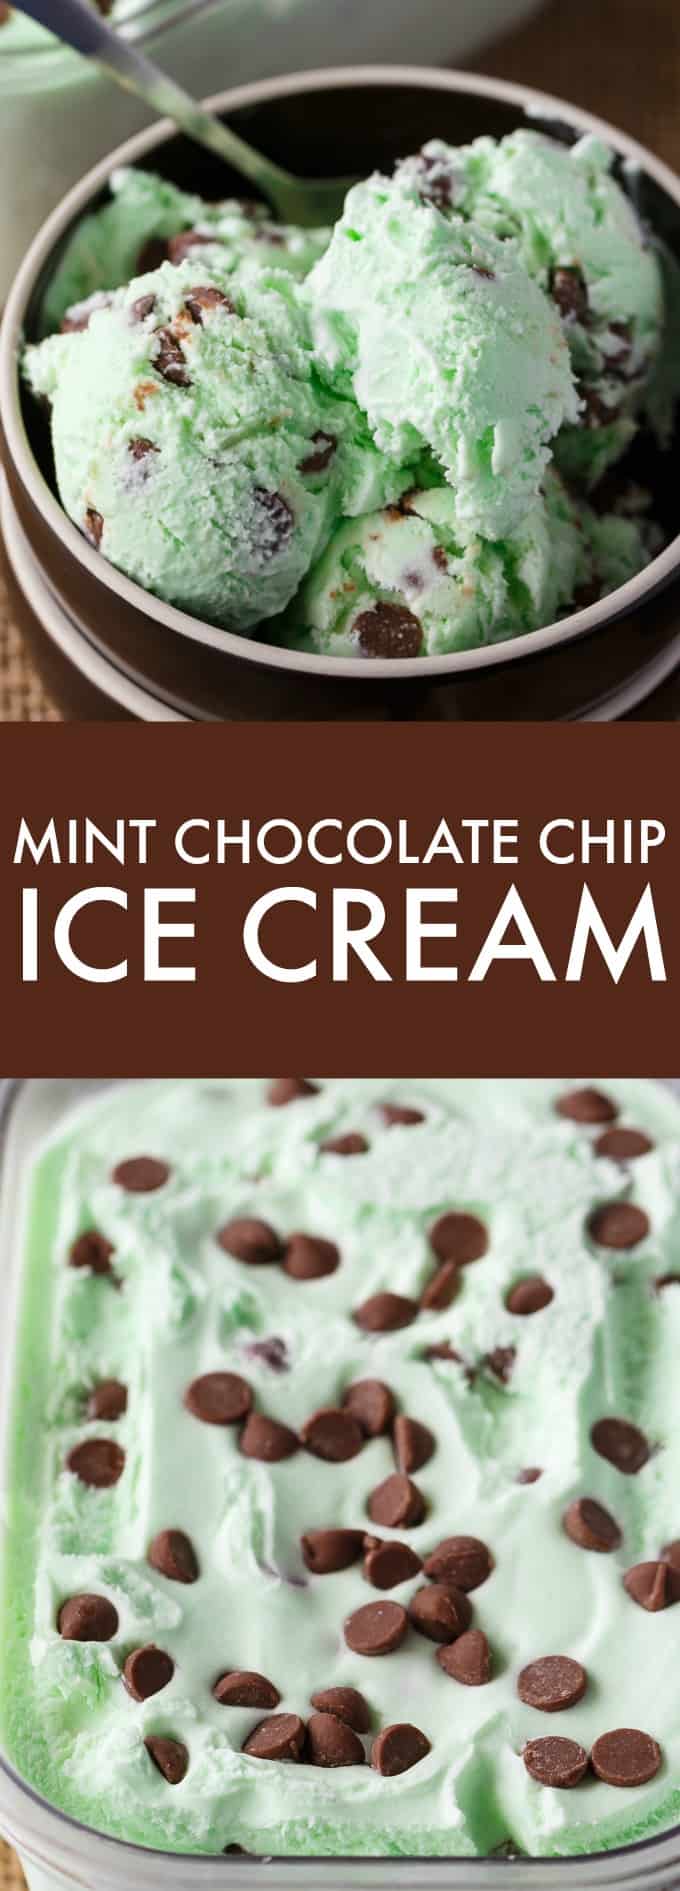 Mint Chocolate Chip Ice Cream - A minty, creamy, and sweet homemade ice cream recipe perfect for summer. No churn needed!